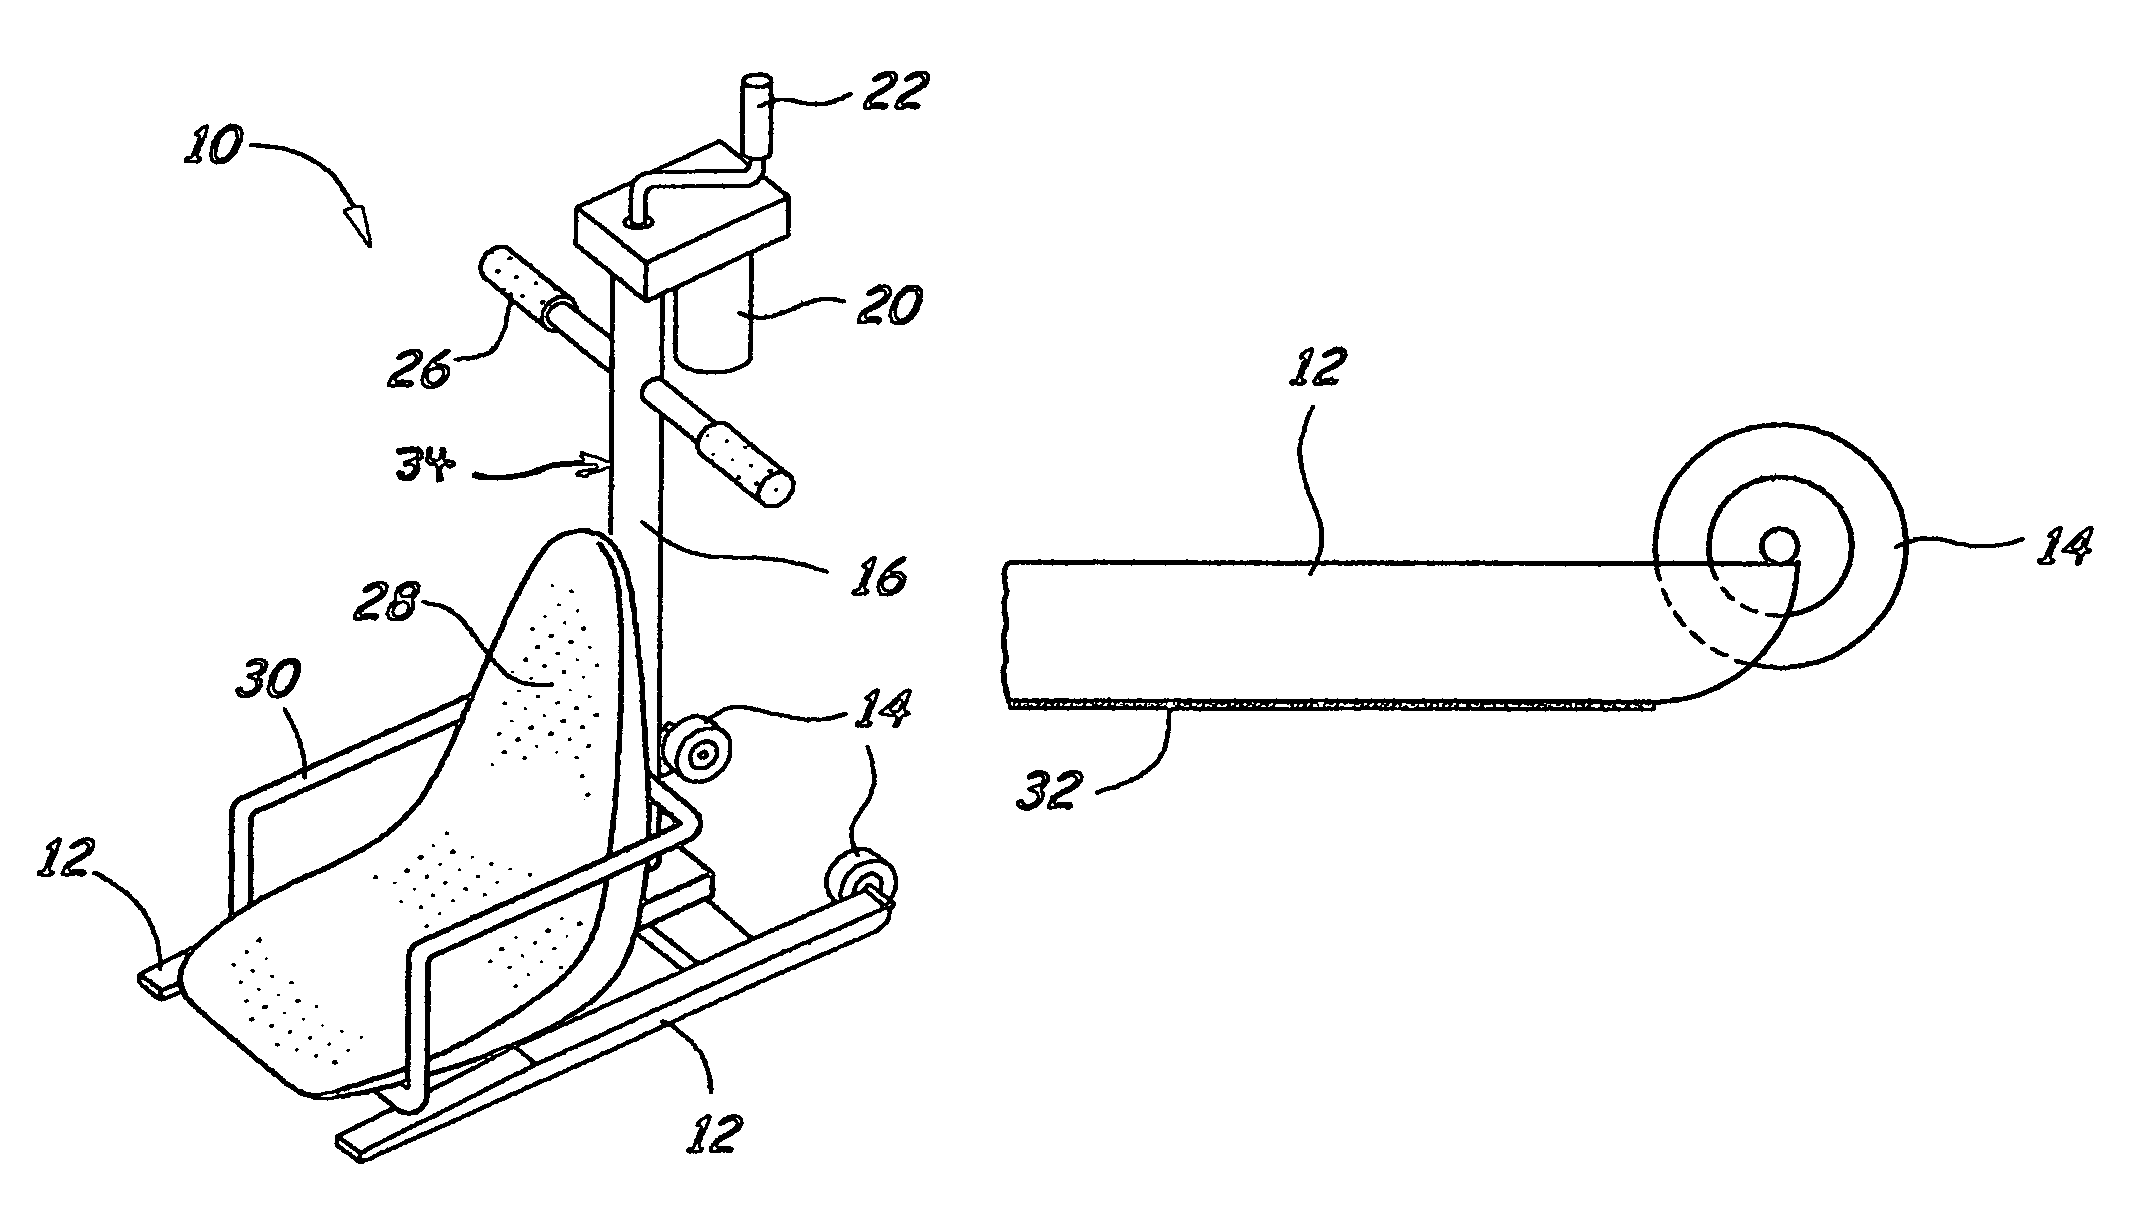 Apparatus and method for a lift seat